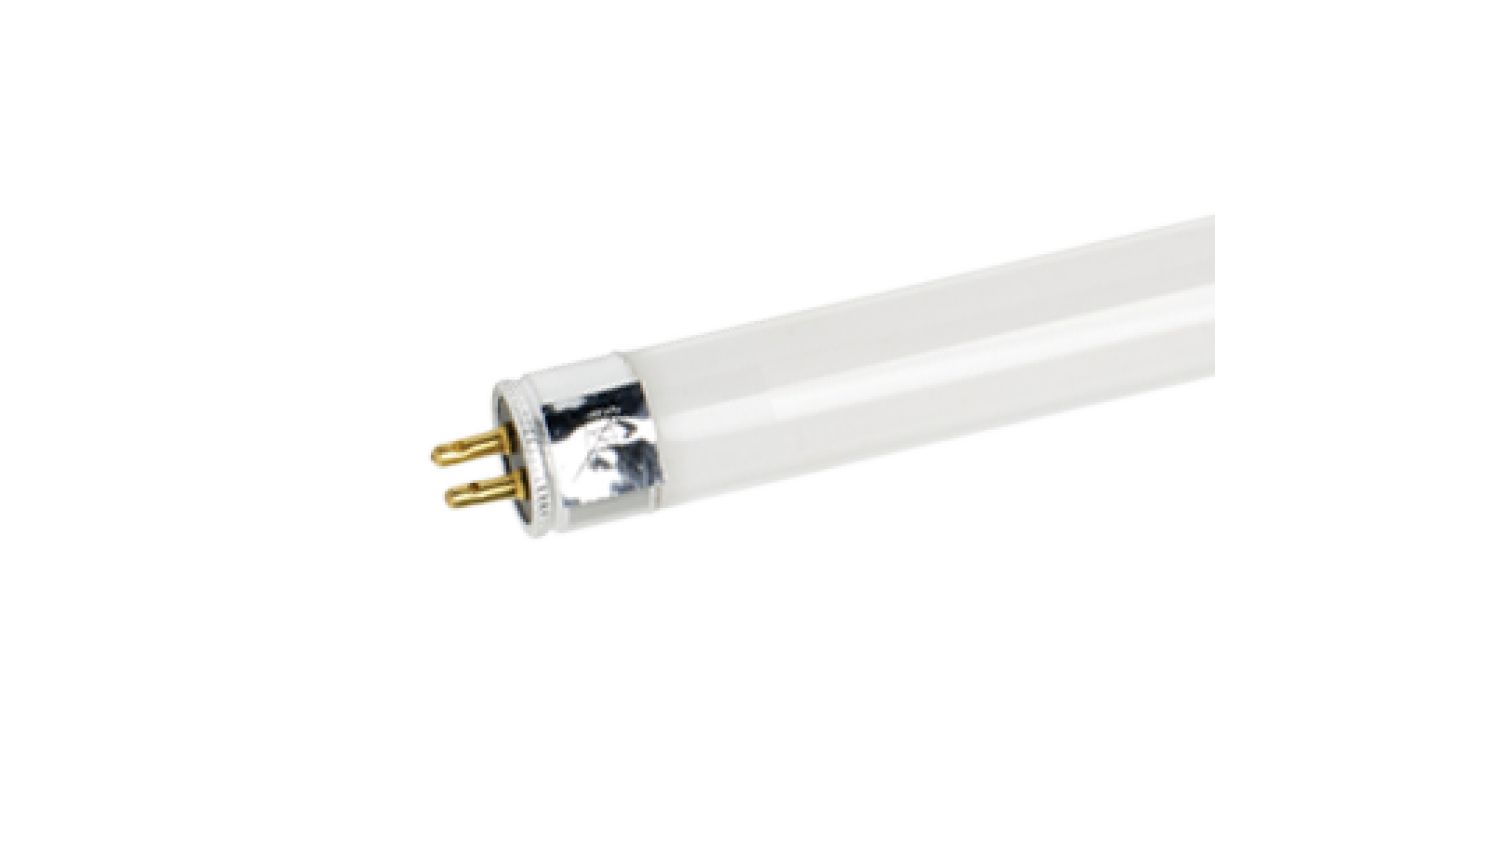 3400K, 288mm excl pins CHECK LENGTH CARFEULLY Leyton Lighting 8w T5 Fluorescent tube 